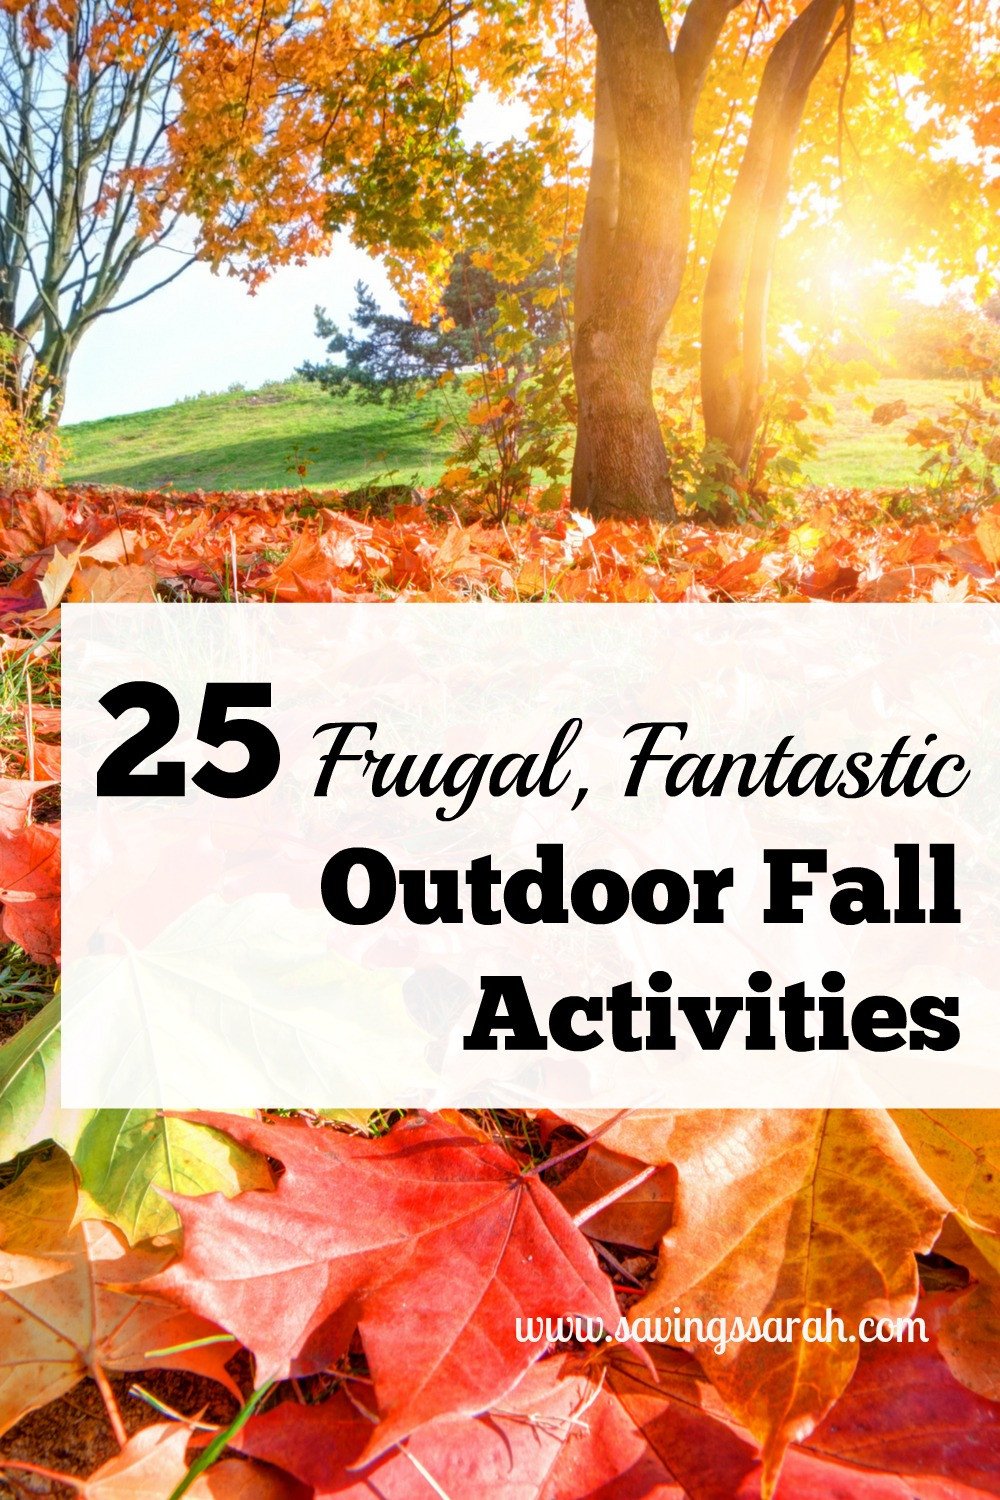 Outdoor Fall Activities
 25 Frugal Fabulous Outdoor Fall Activities Earning and